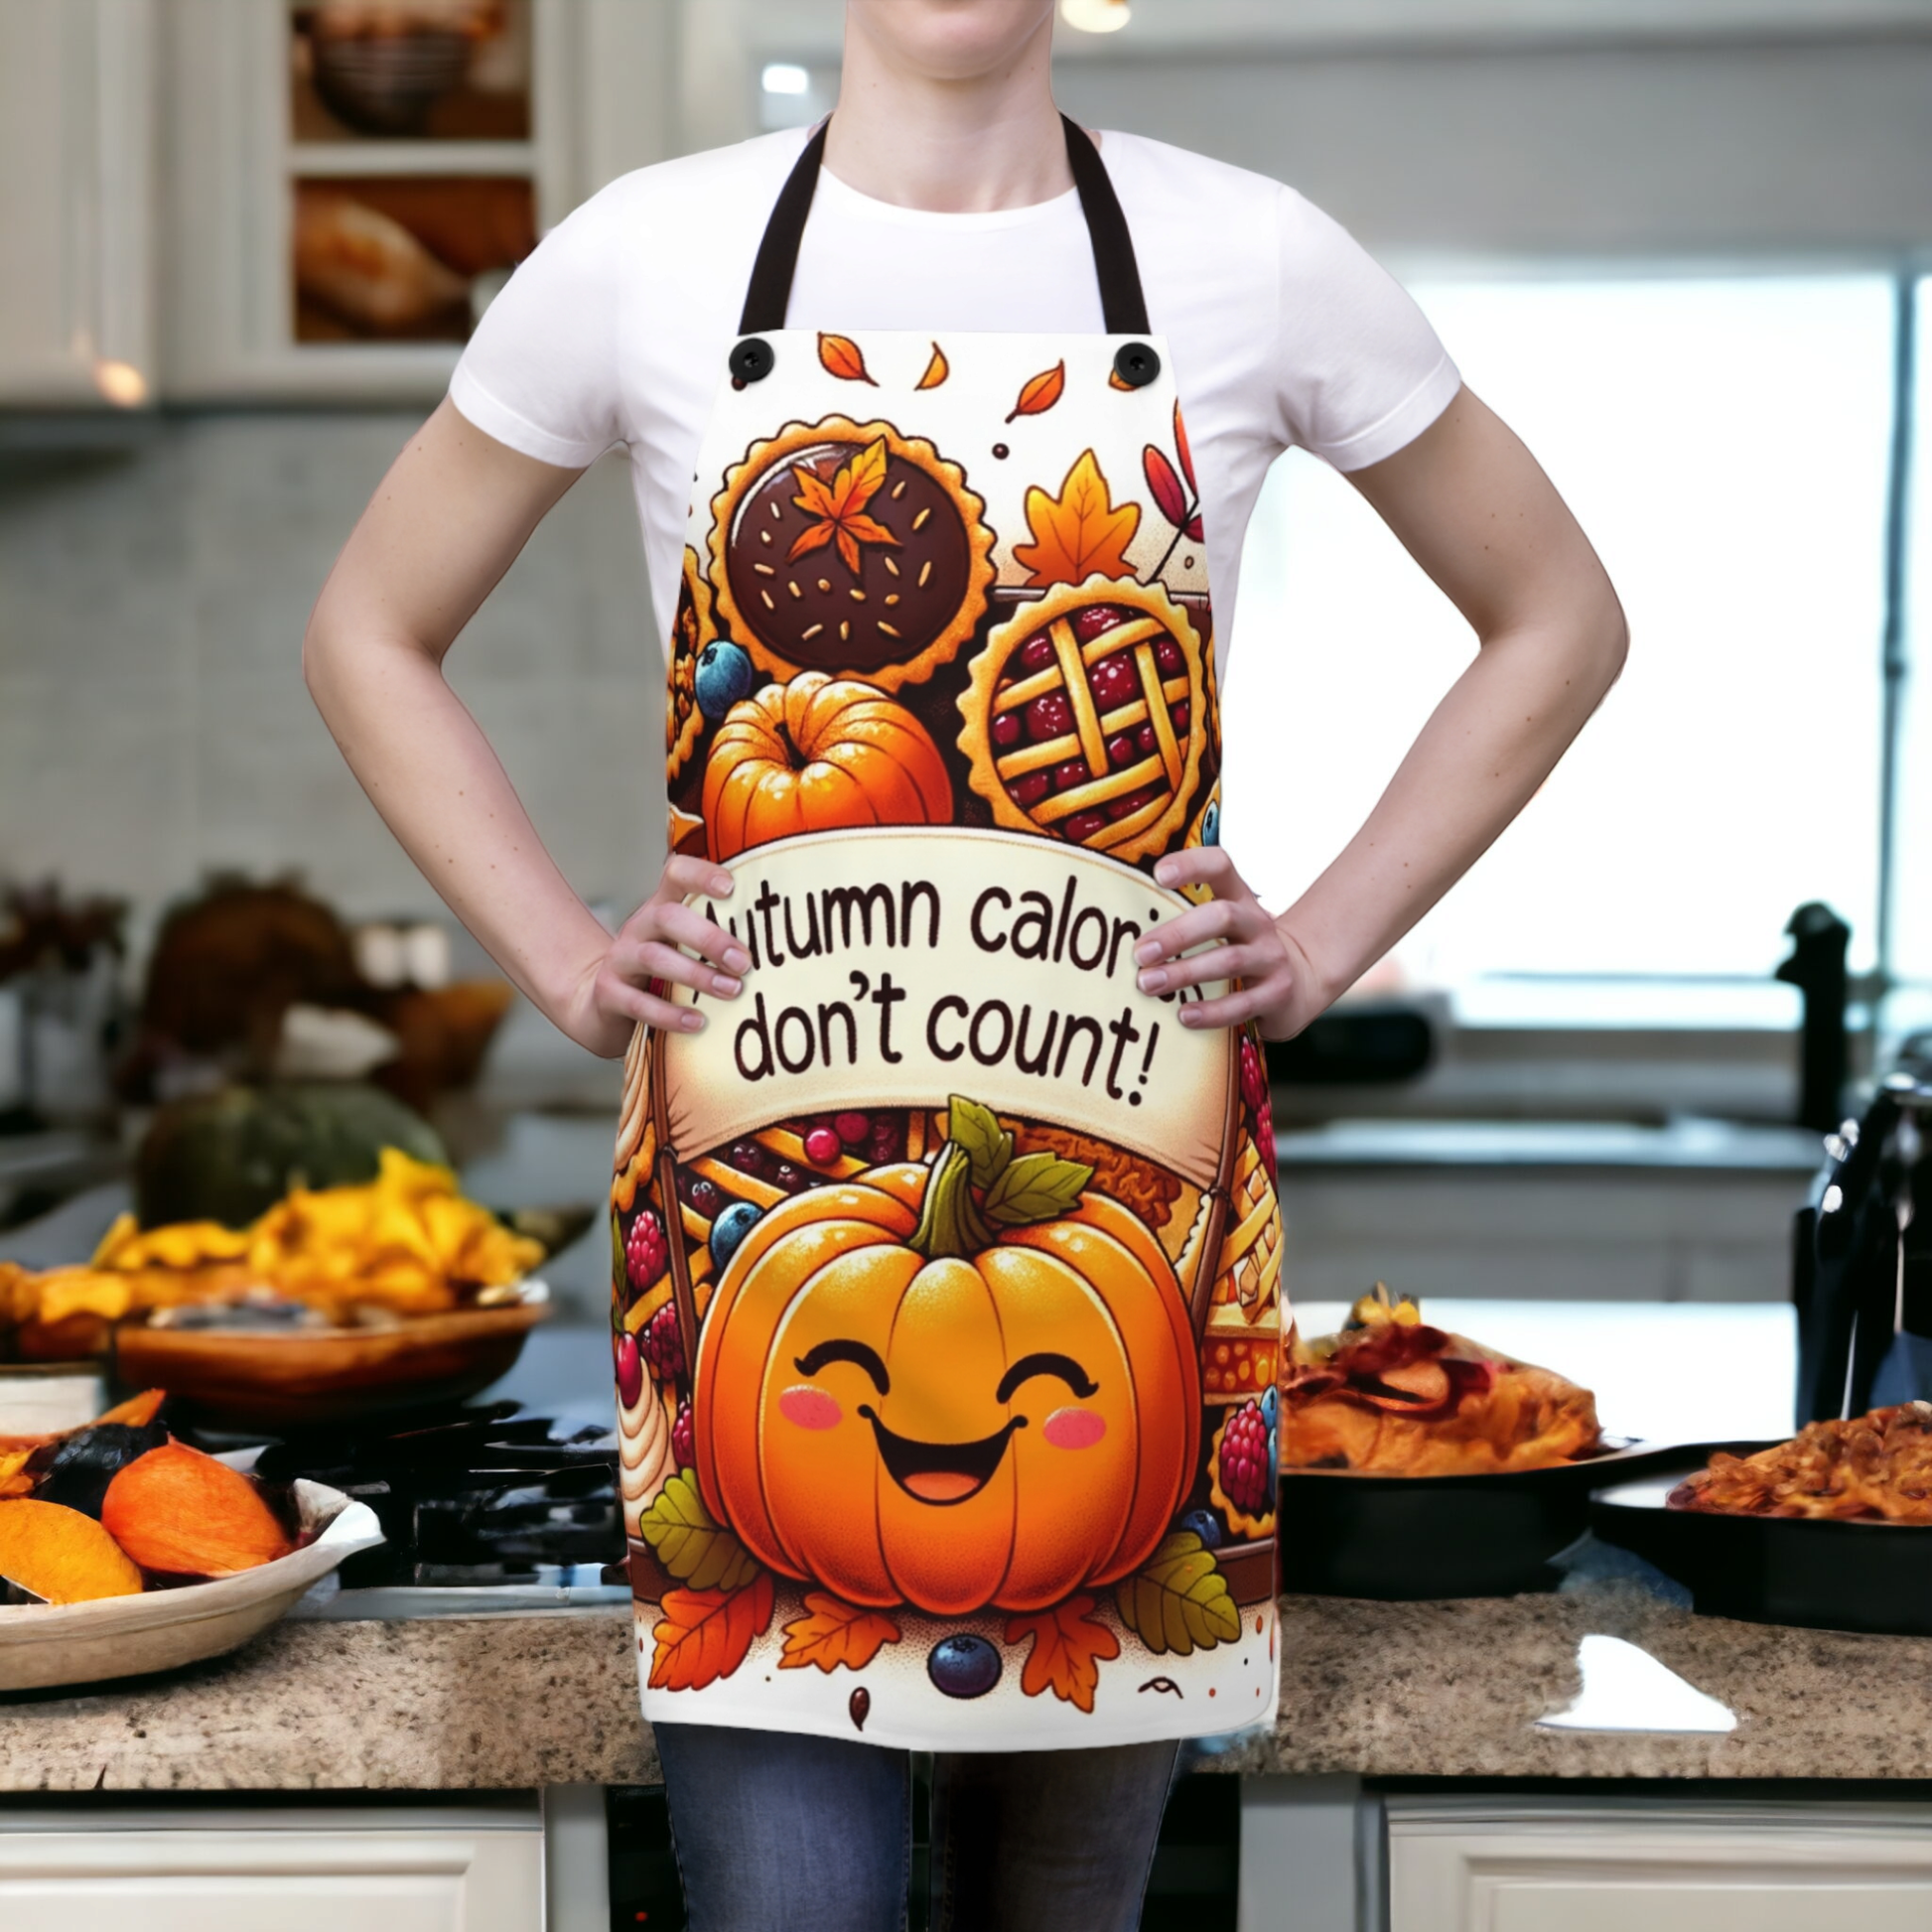 Autumn Calories Don't Count Apron Accessories Bigger Than Life One Size  